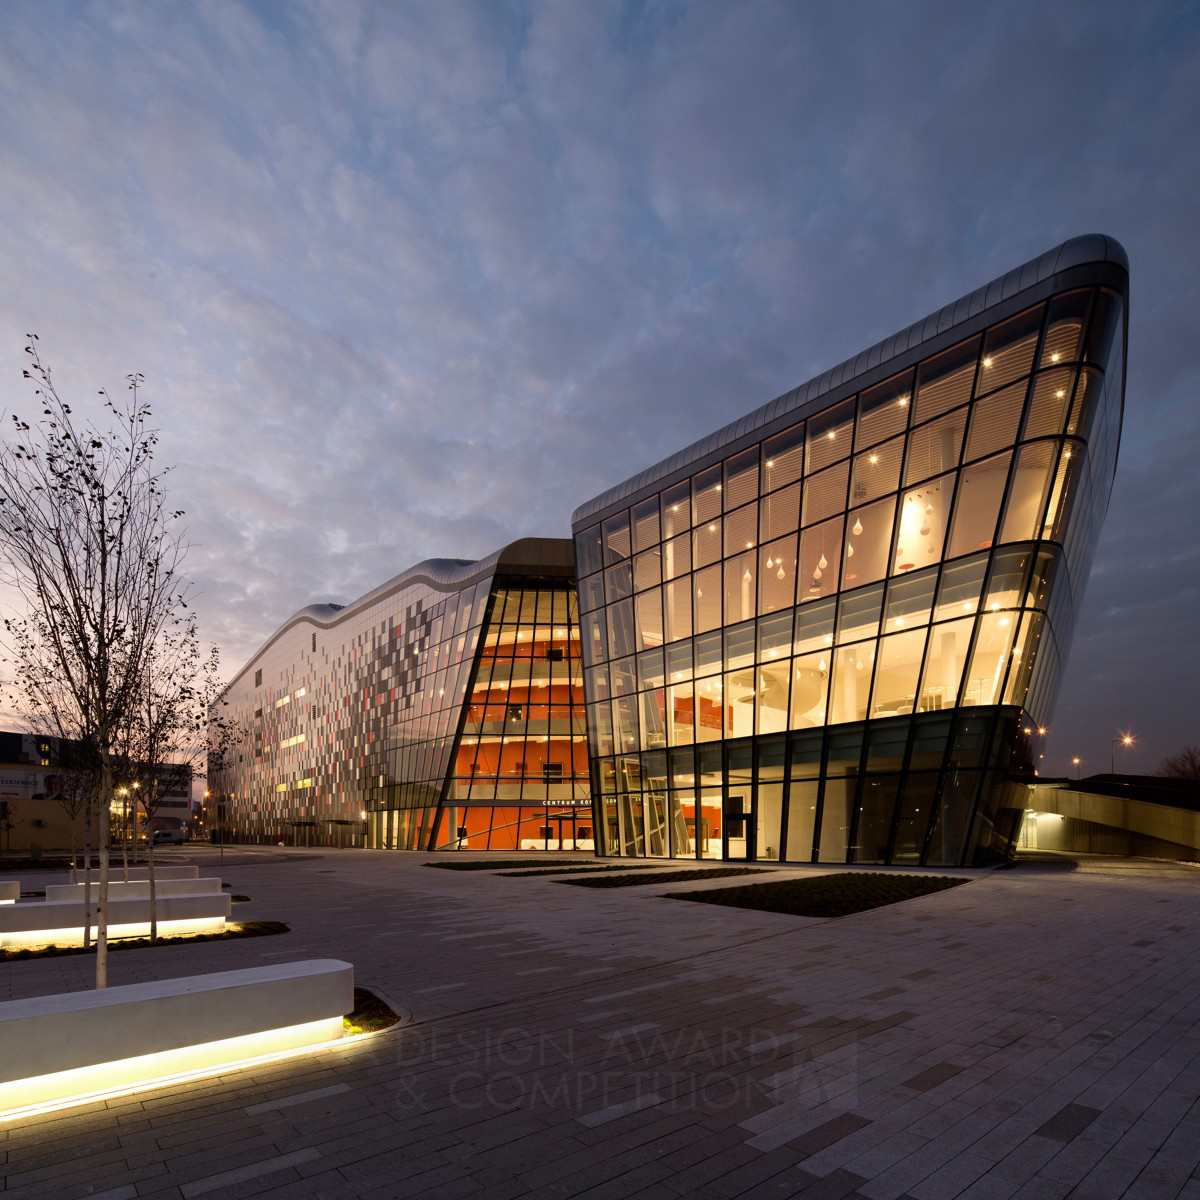 ICE Krakow Concert and congress centre by Ingarden & Ewý Architects